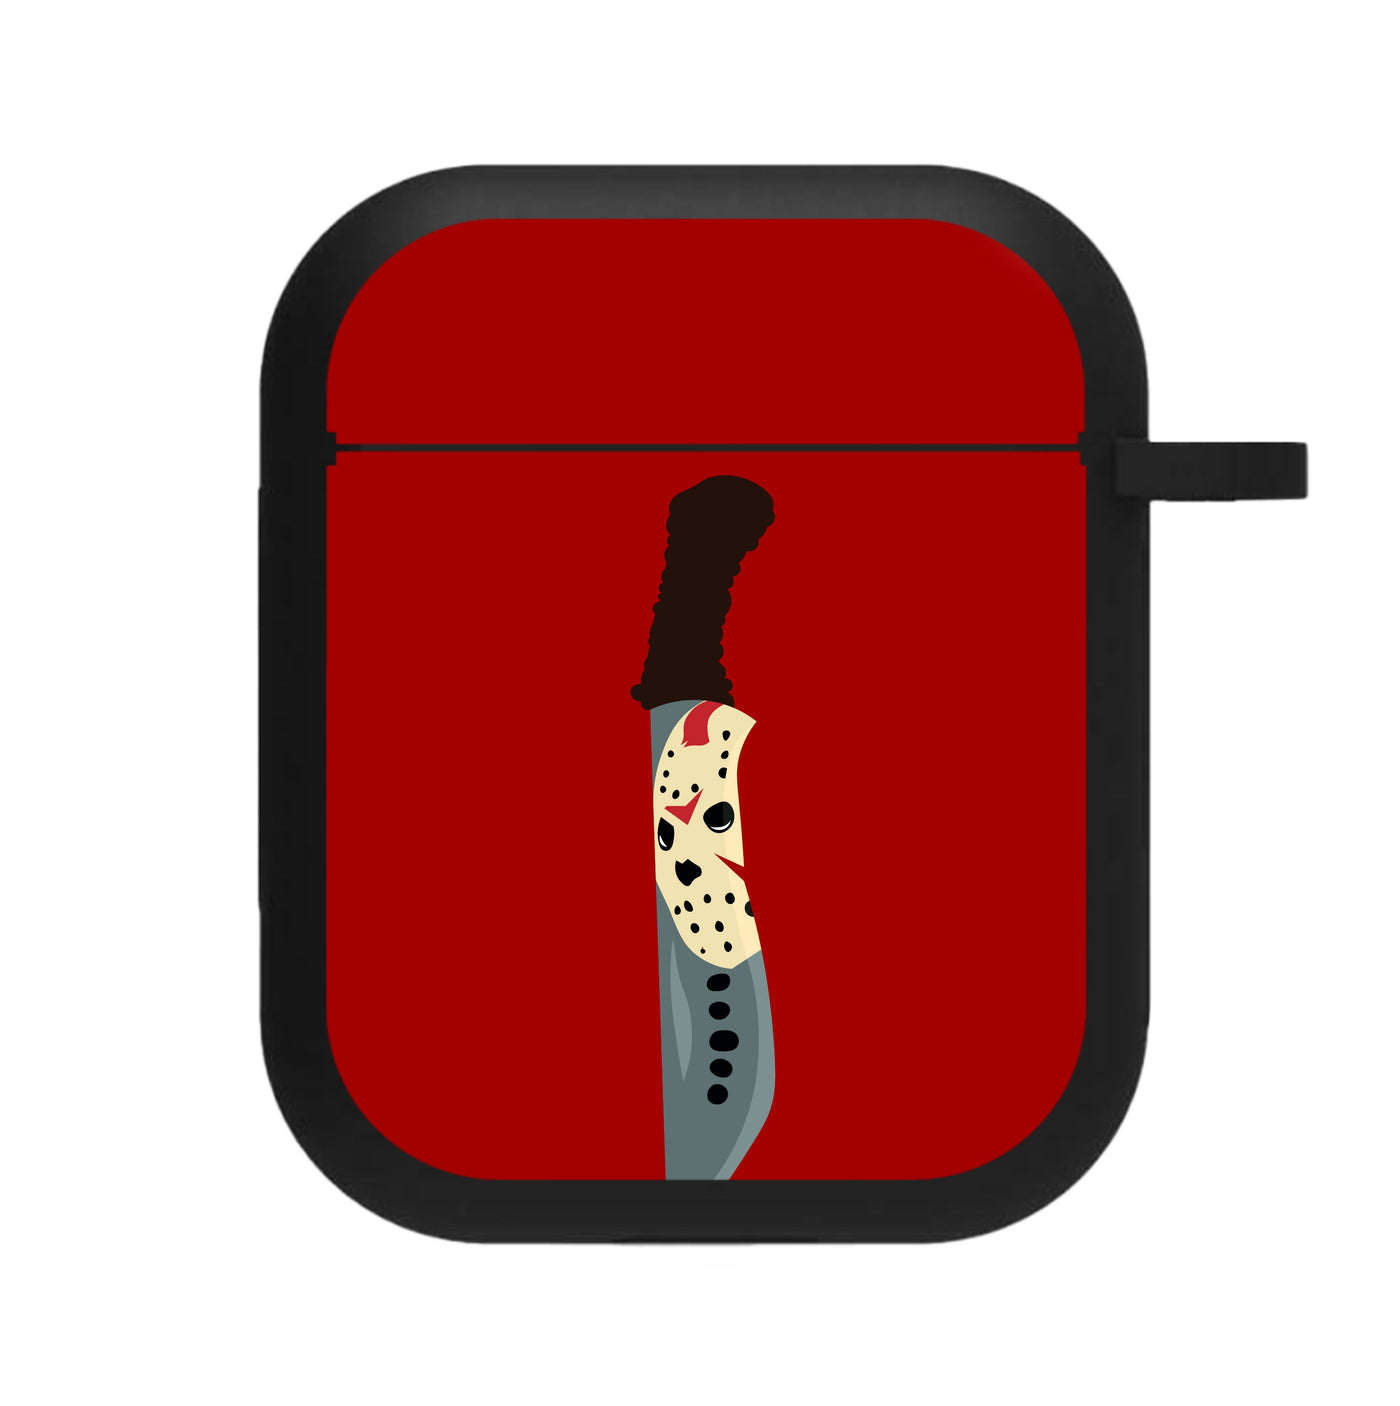 Jason Knife - Friday The 13th AirPods Case